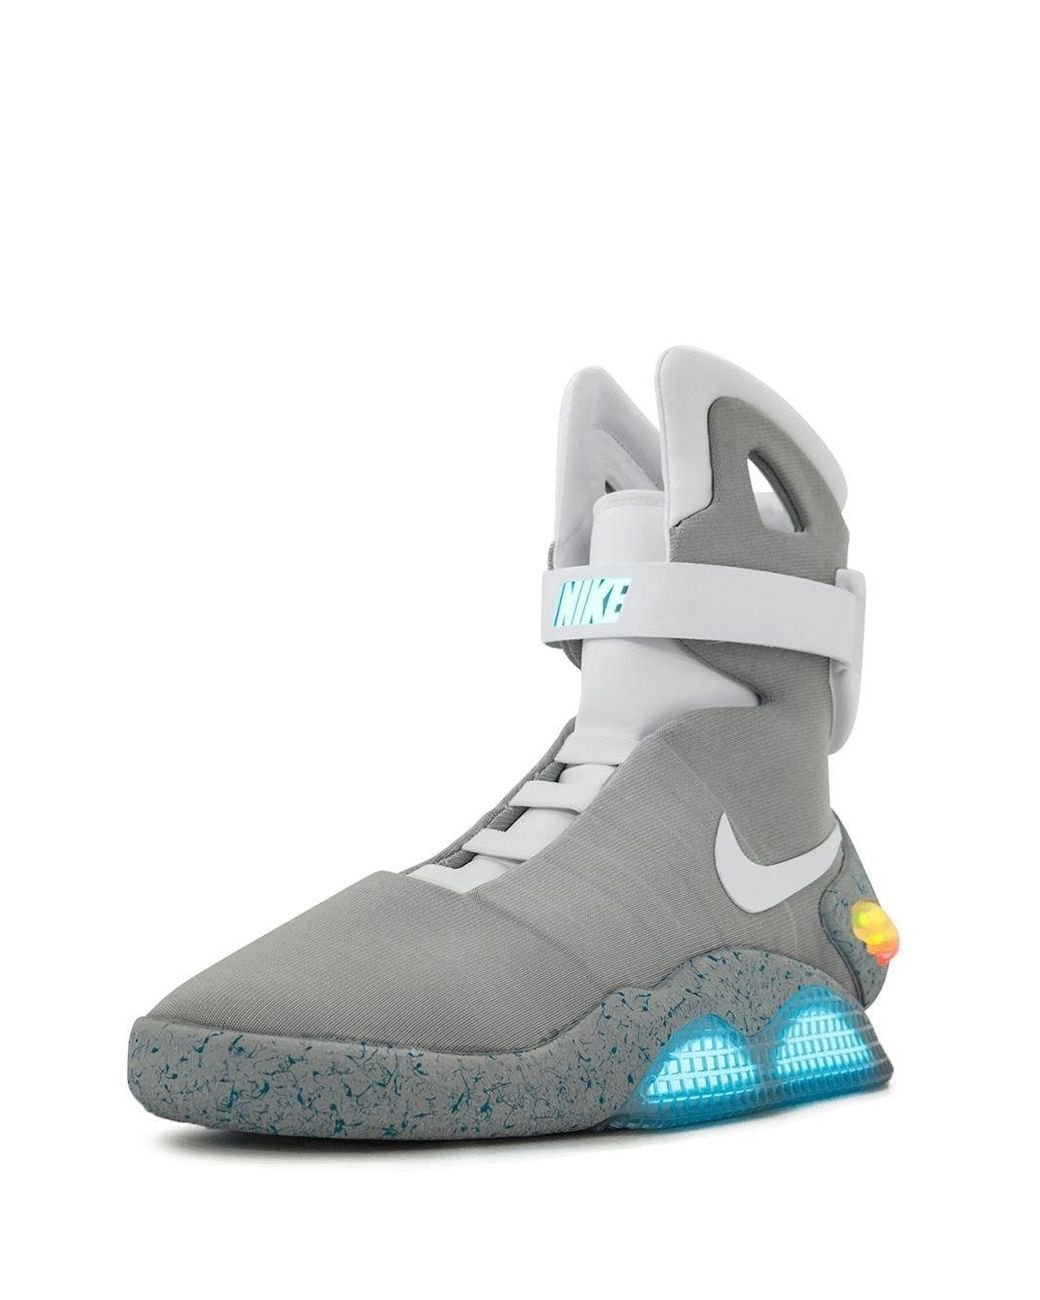 the price of nike air mags